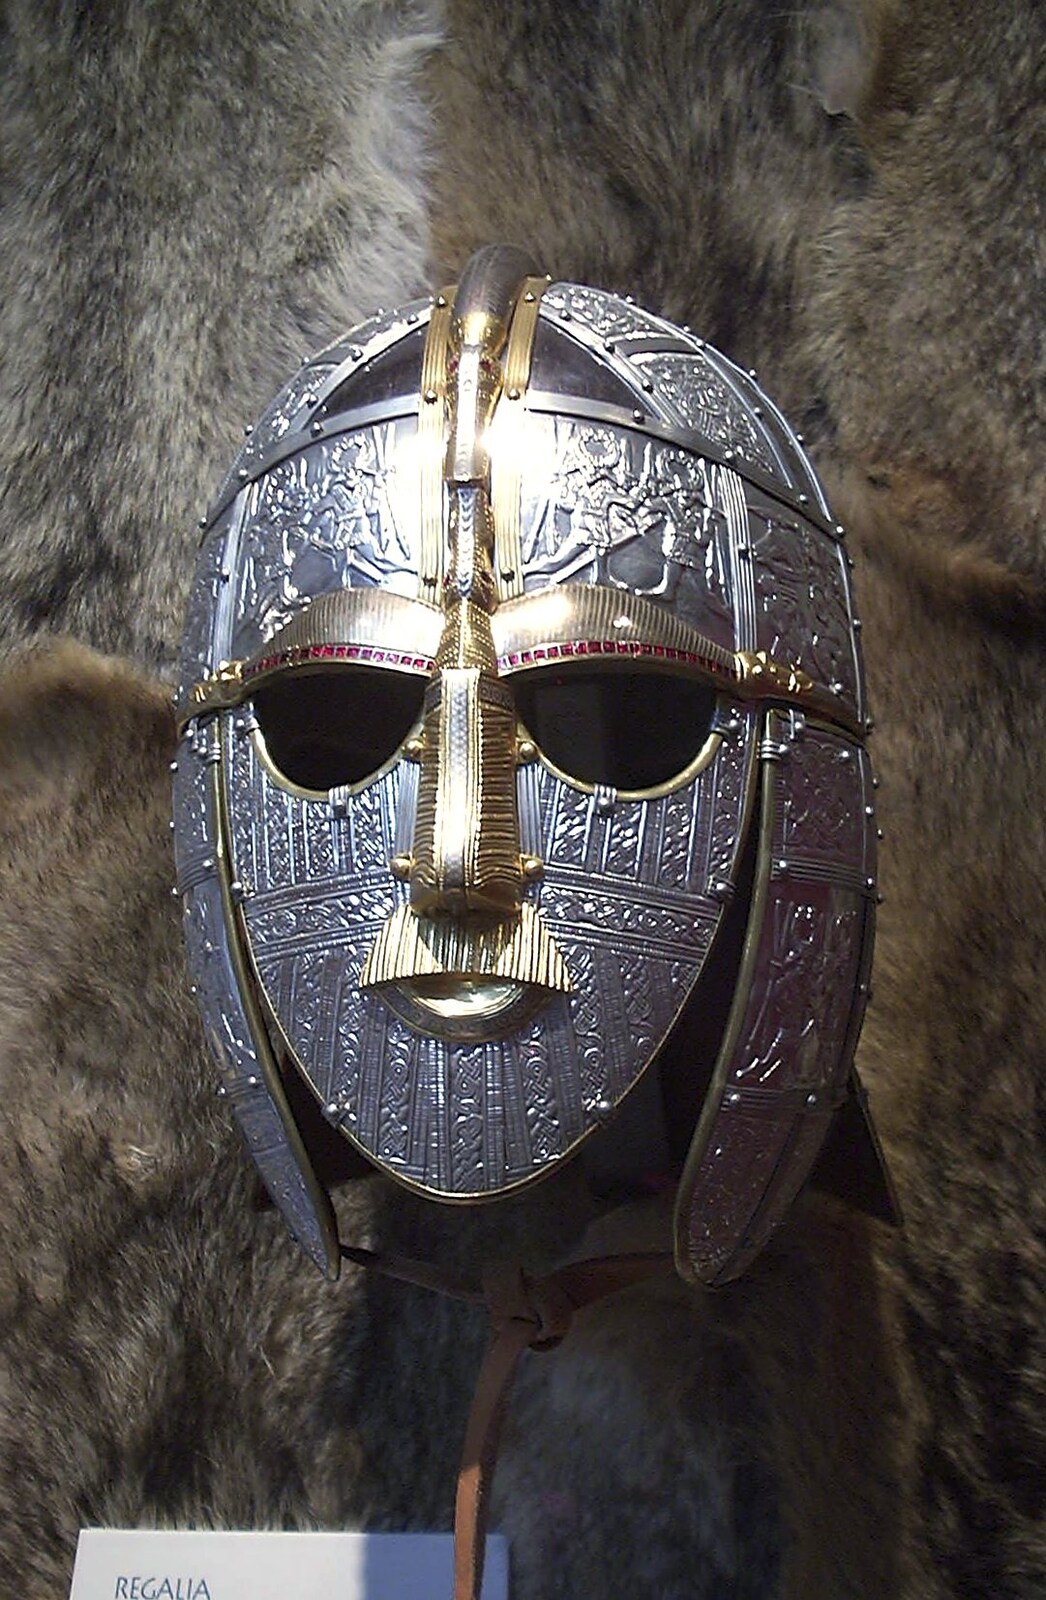 The reproduction of the famous Sutton Hoo helmet from Mother and Mike Visit, Aldringham, Suffolk - 26th May 2004